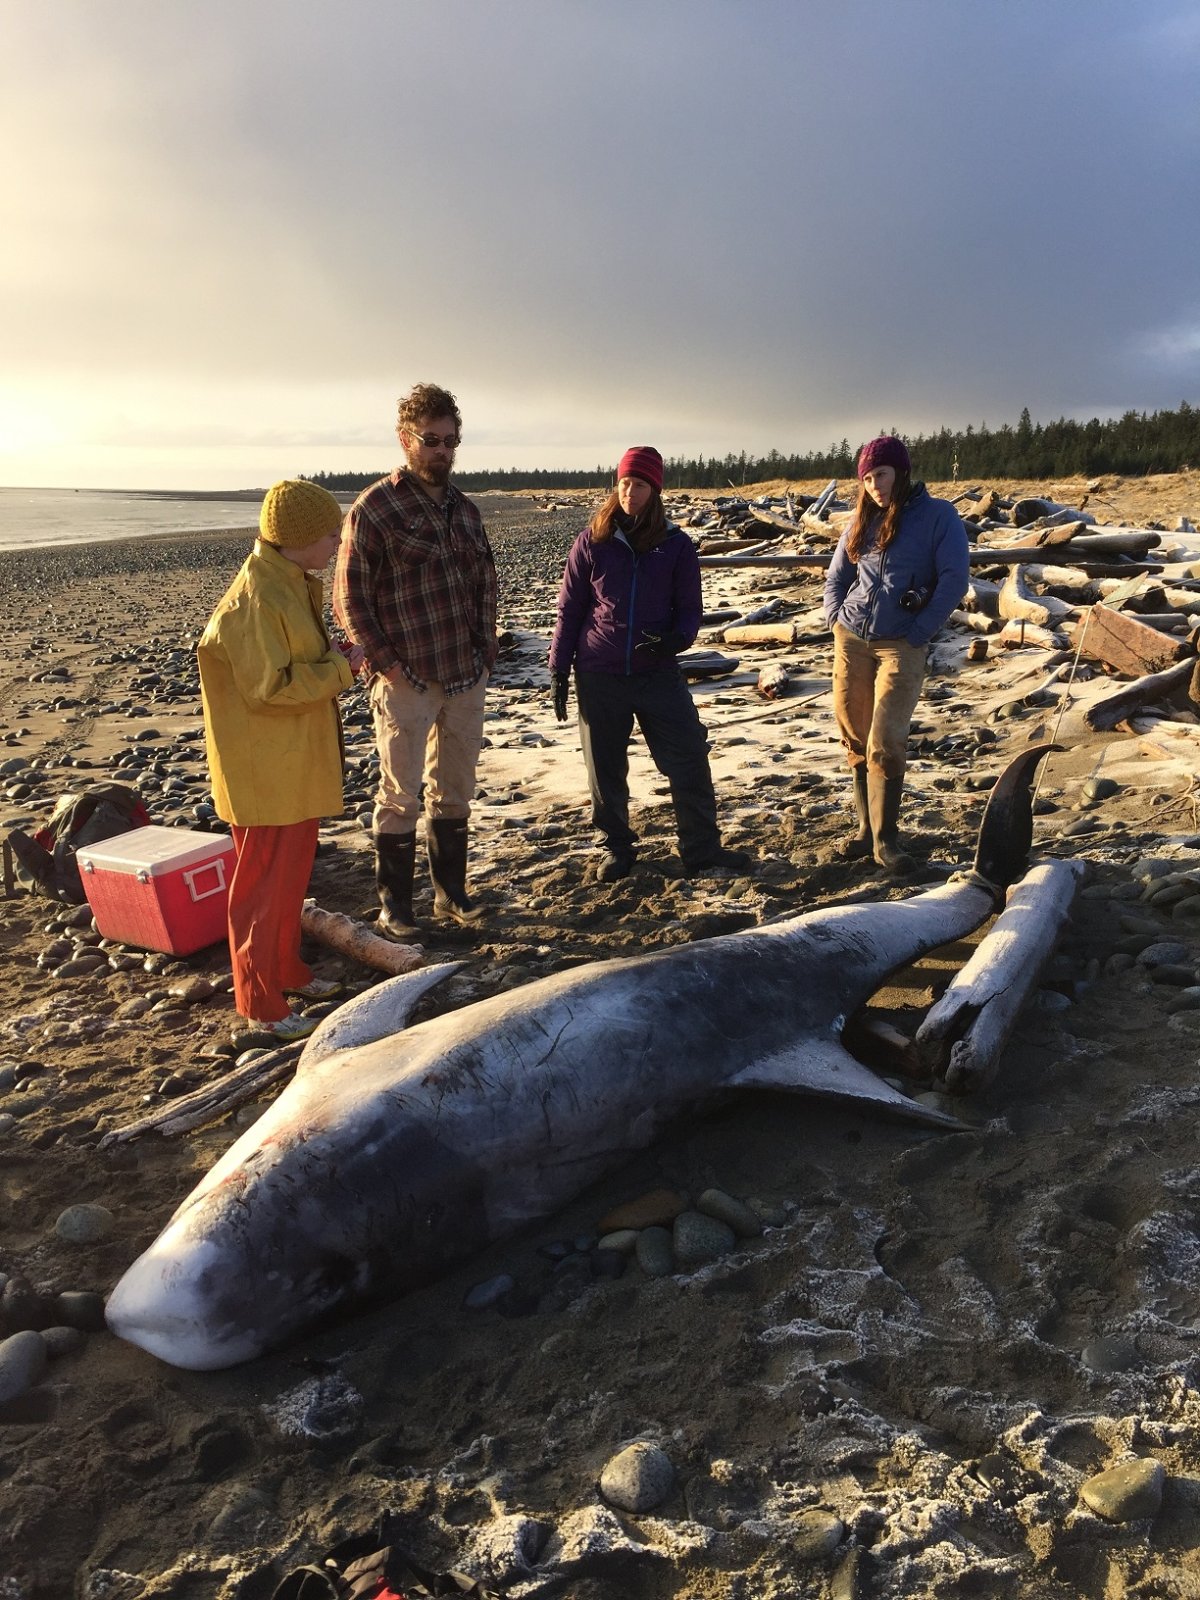 Body of rare dolphin washes up in Haida Gwaii - image